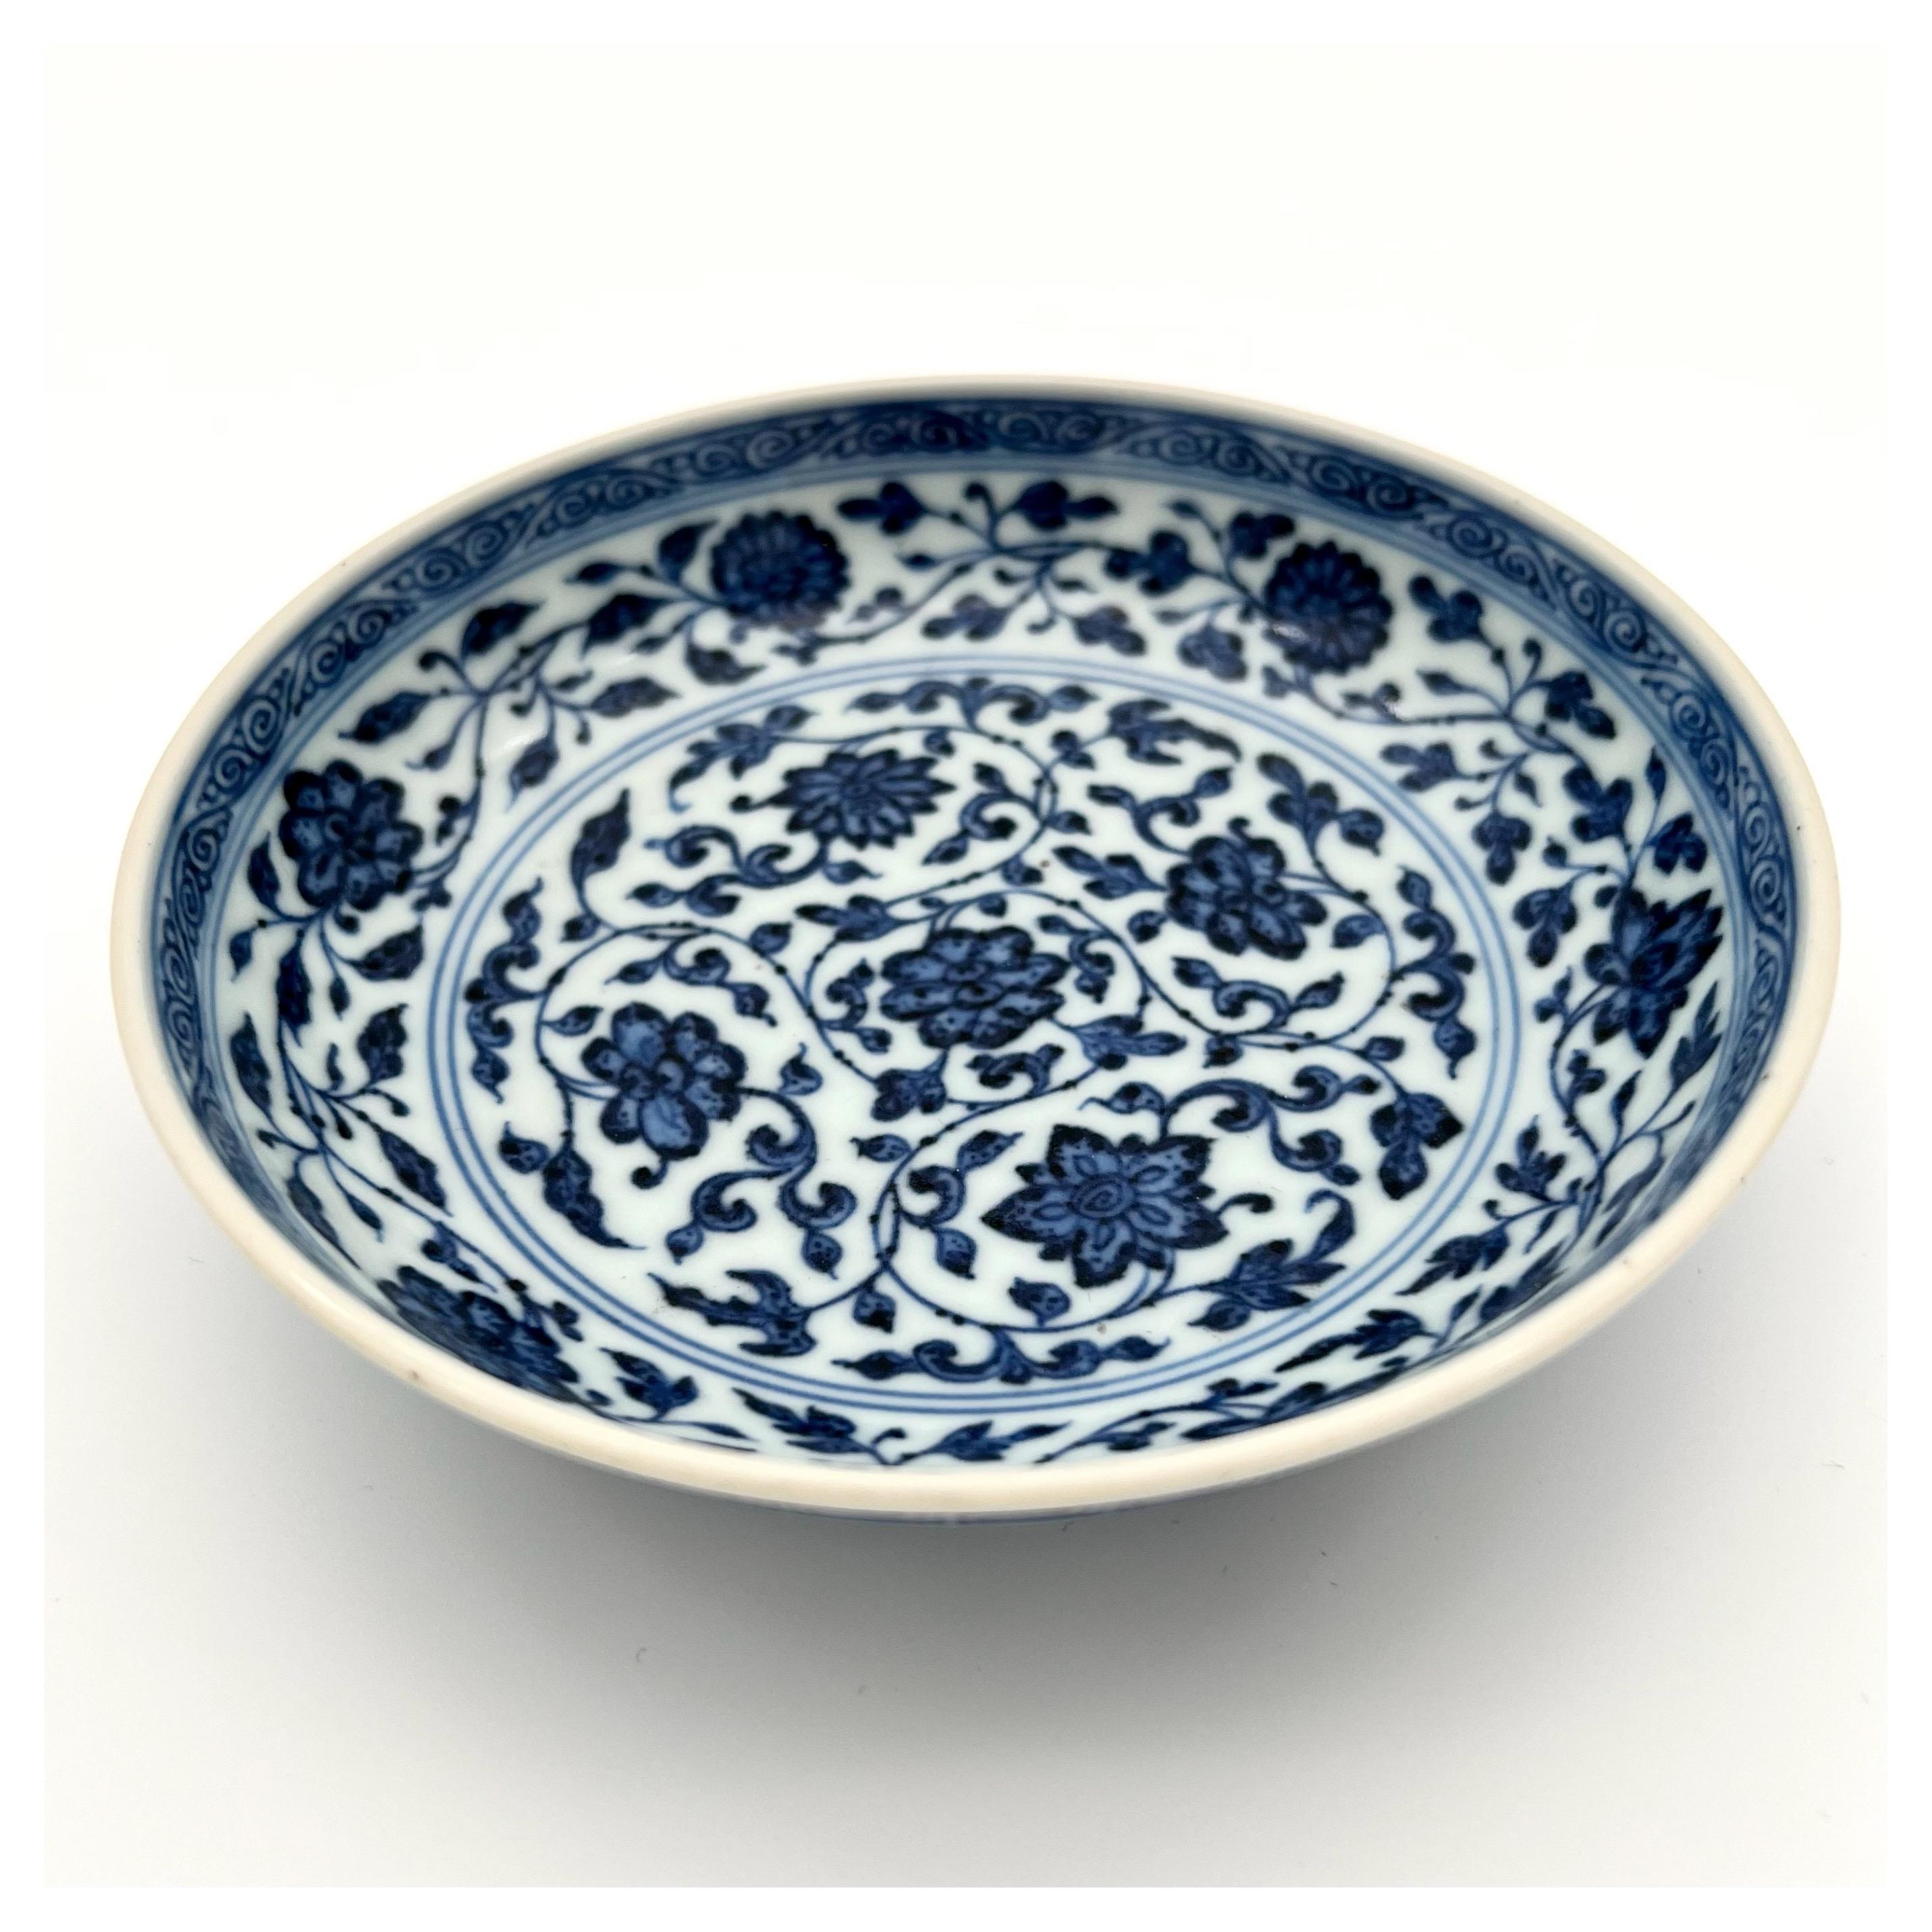 Ceramic Blue and White Ming-Style Dish, Qianlong Mark and Period, China 1736 - 1795